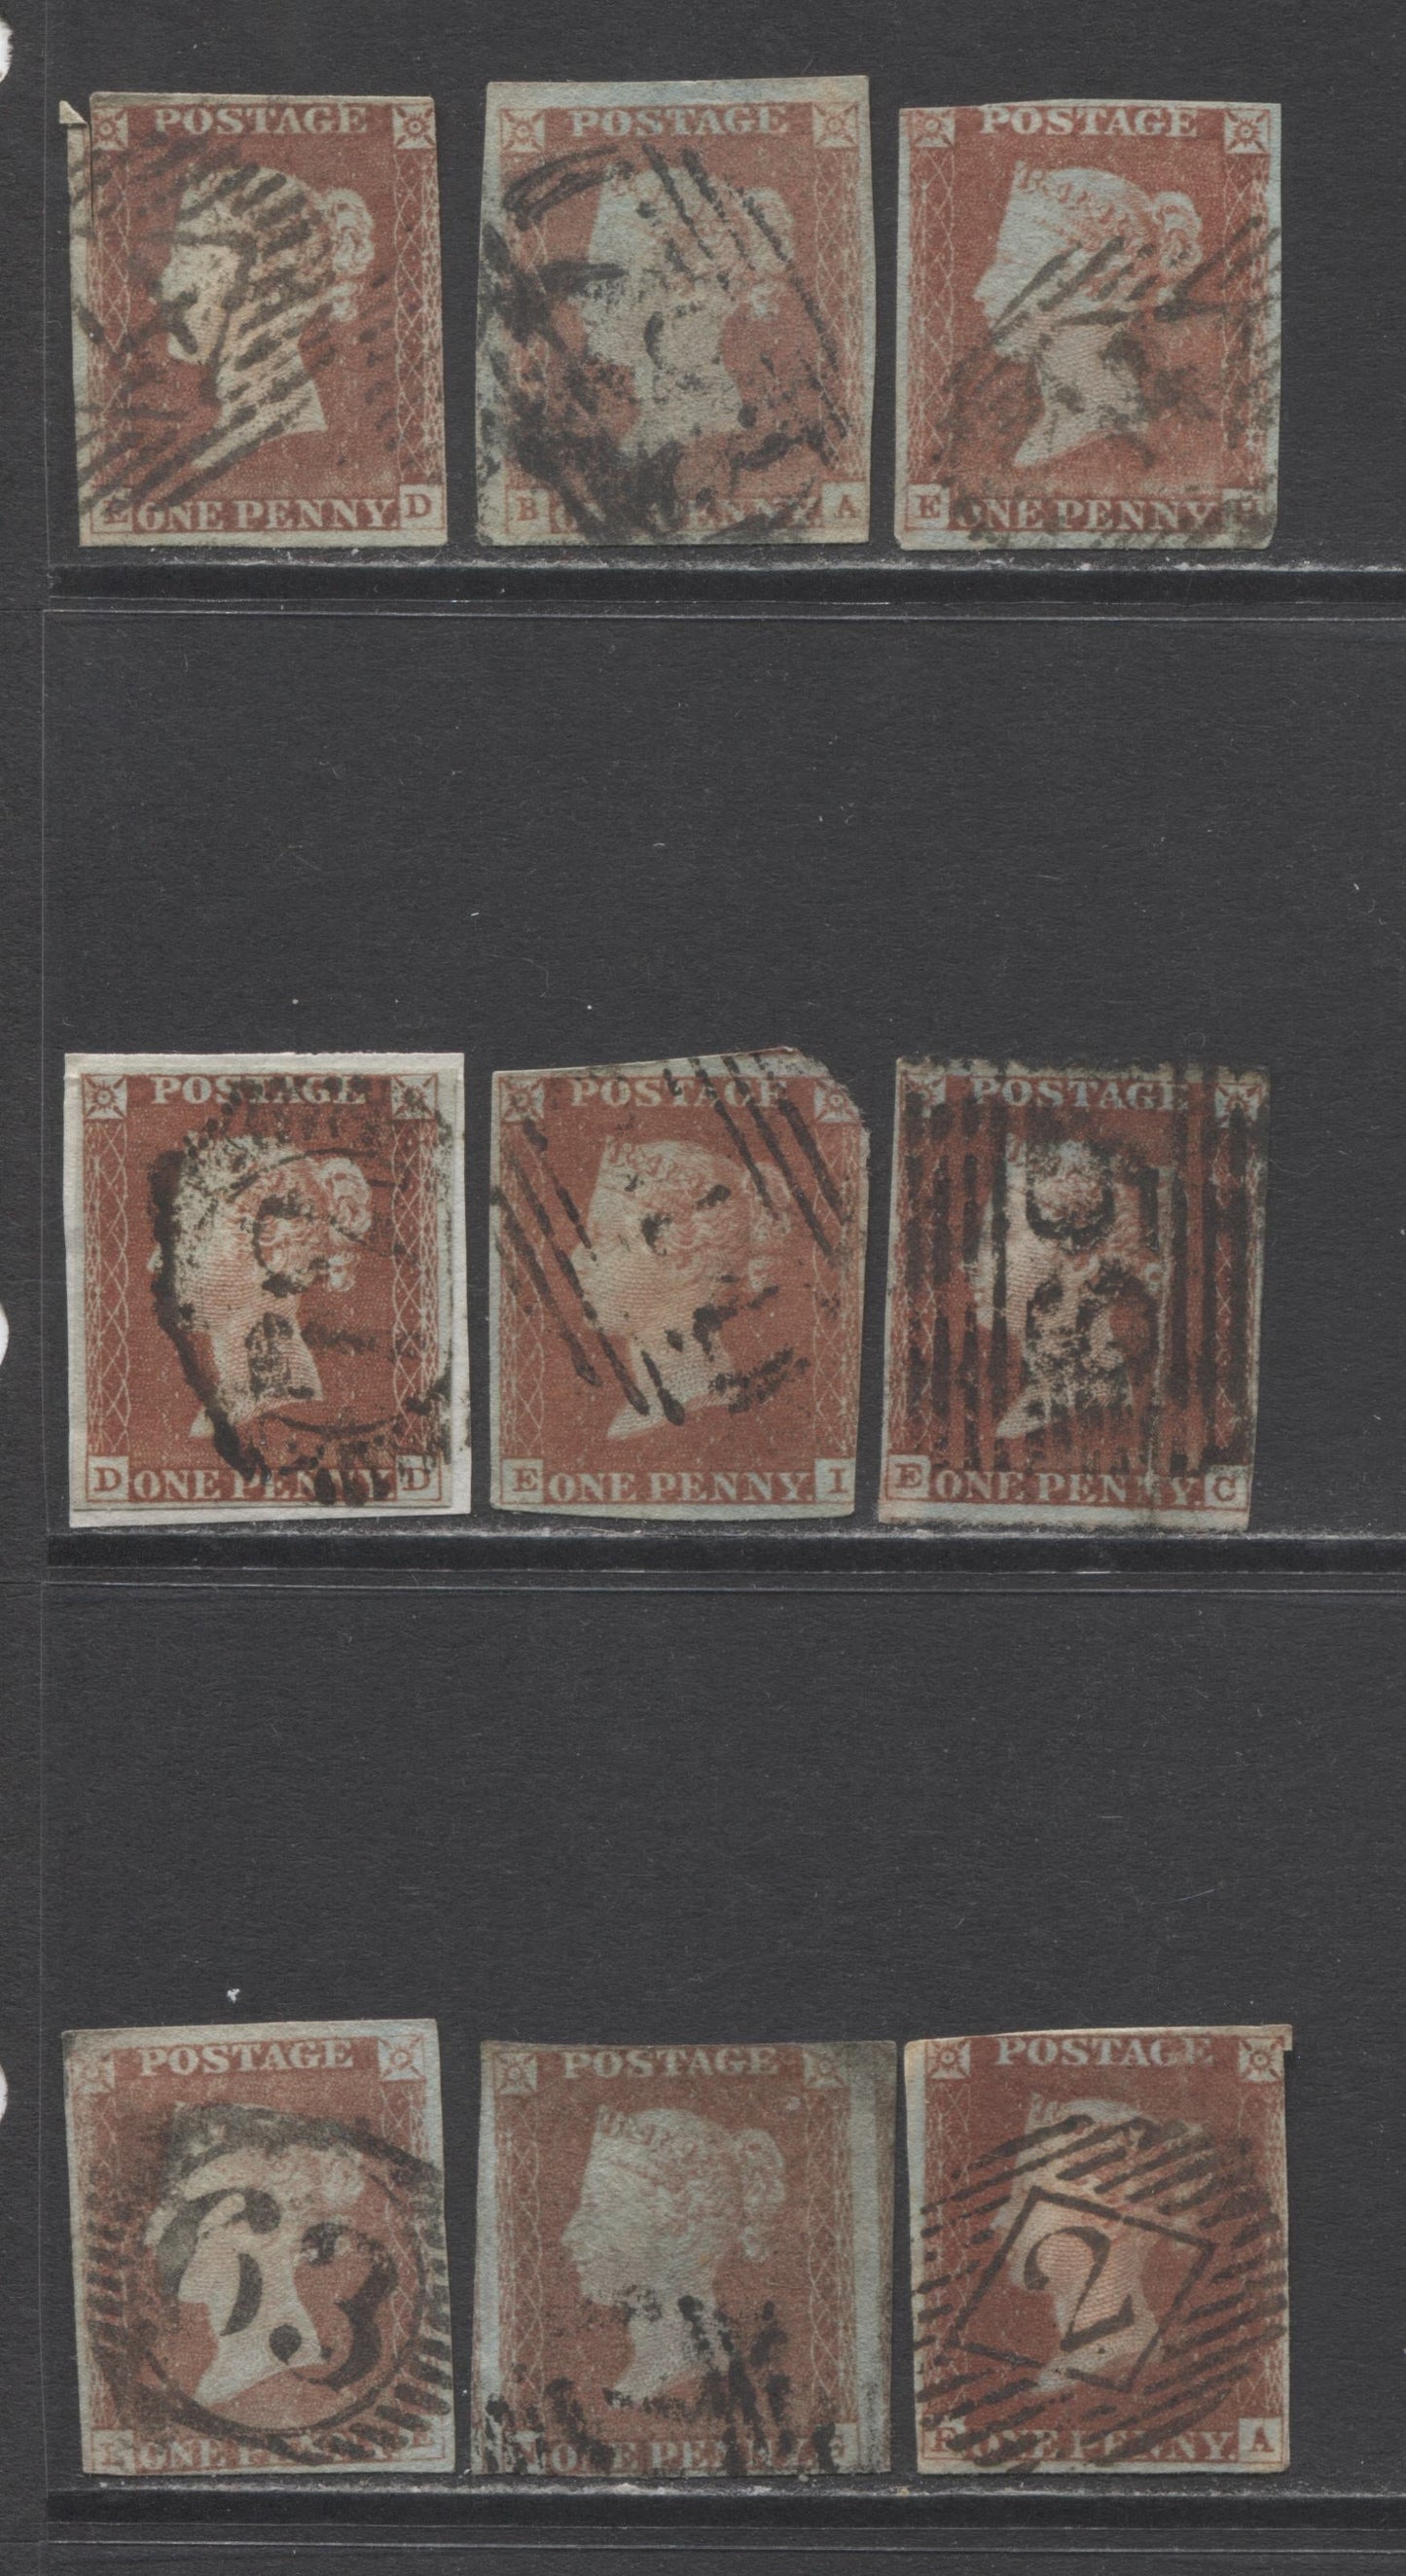 Lot 346 Great Britain SC#3 1841 Red Penny Issue, An Ungraded Study Lot of 9 2-3 Margin Examples, 2017 Scott Cat. $292.50, Est. $20, Click on Listing to See ALL Pictures